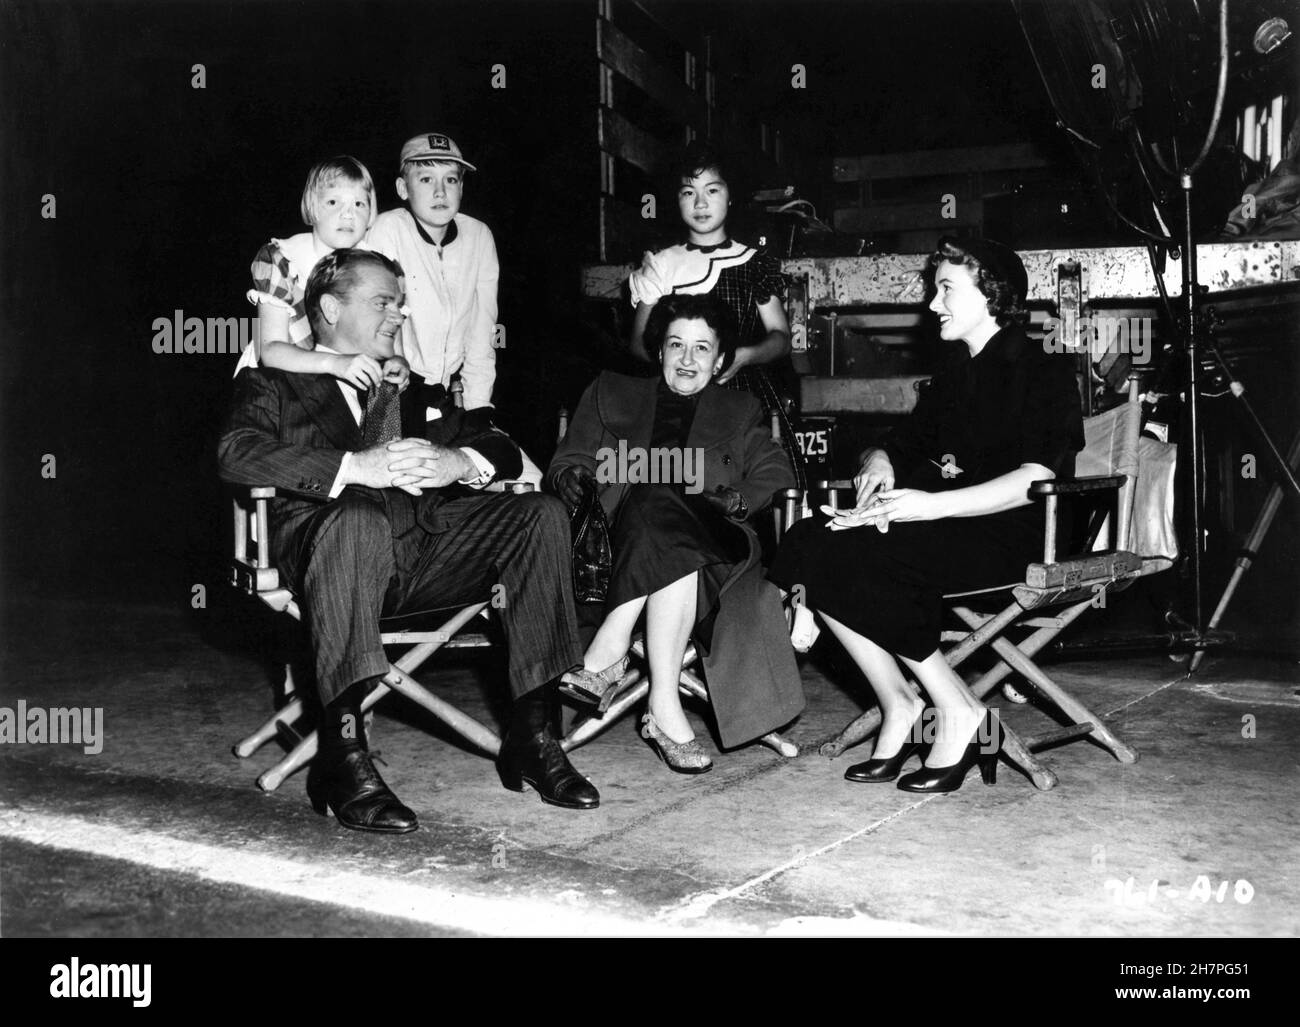 JAMES CAGNEY with his Wife FRANCES / WILLIE CAGNEY and their adopted children CASEY CAGNEY and JAMES CAGNEY Jr on set candid with PHYLLIS THAXTER during filming of COME FILL THE STOP 1951 director GORDON DOUGLAS novel Harlan Ware cinematography Robert Burks producer Henry Blanke Warner Bros. Stock Photo